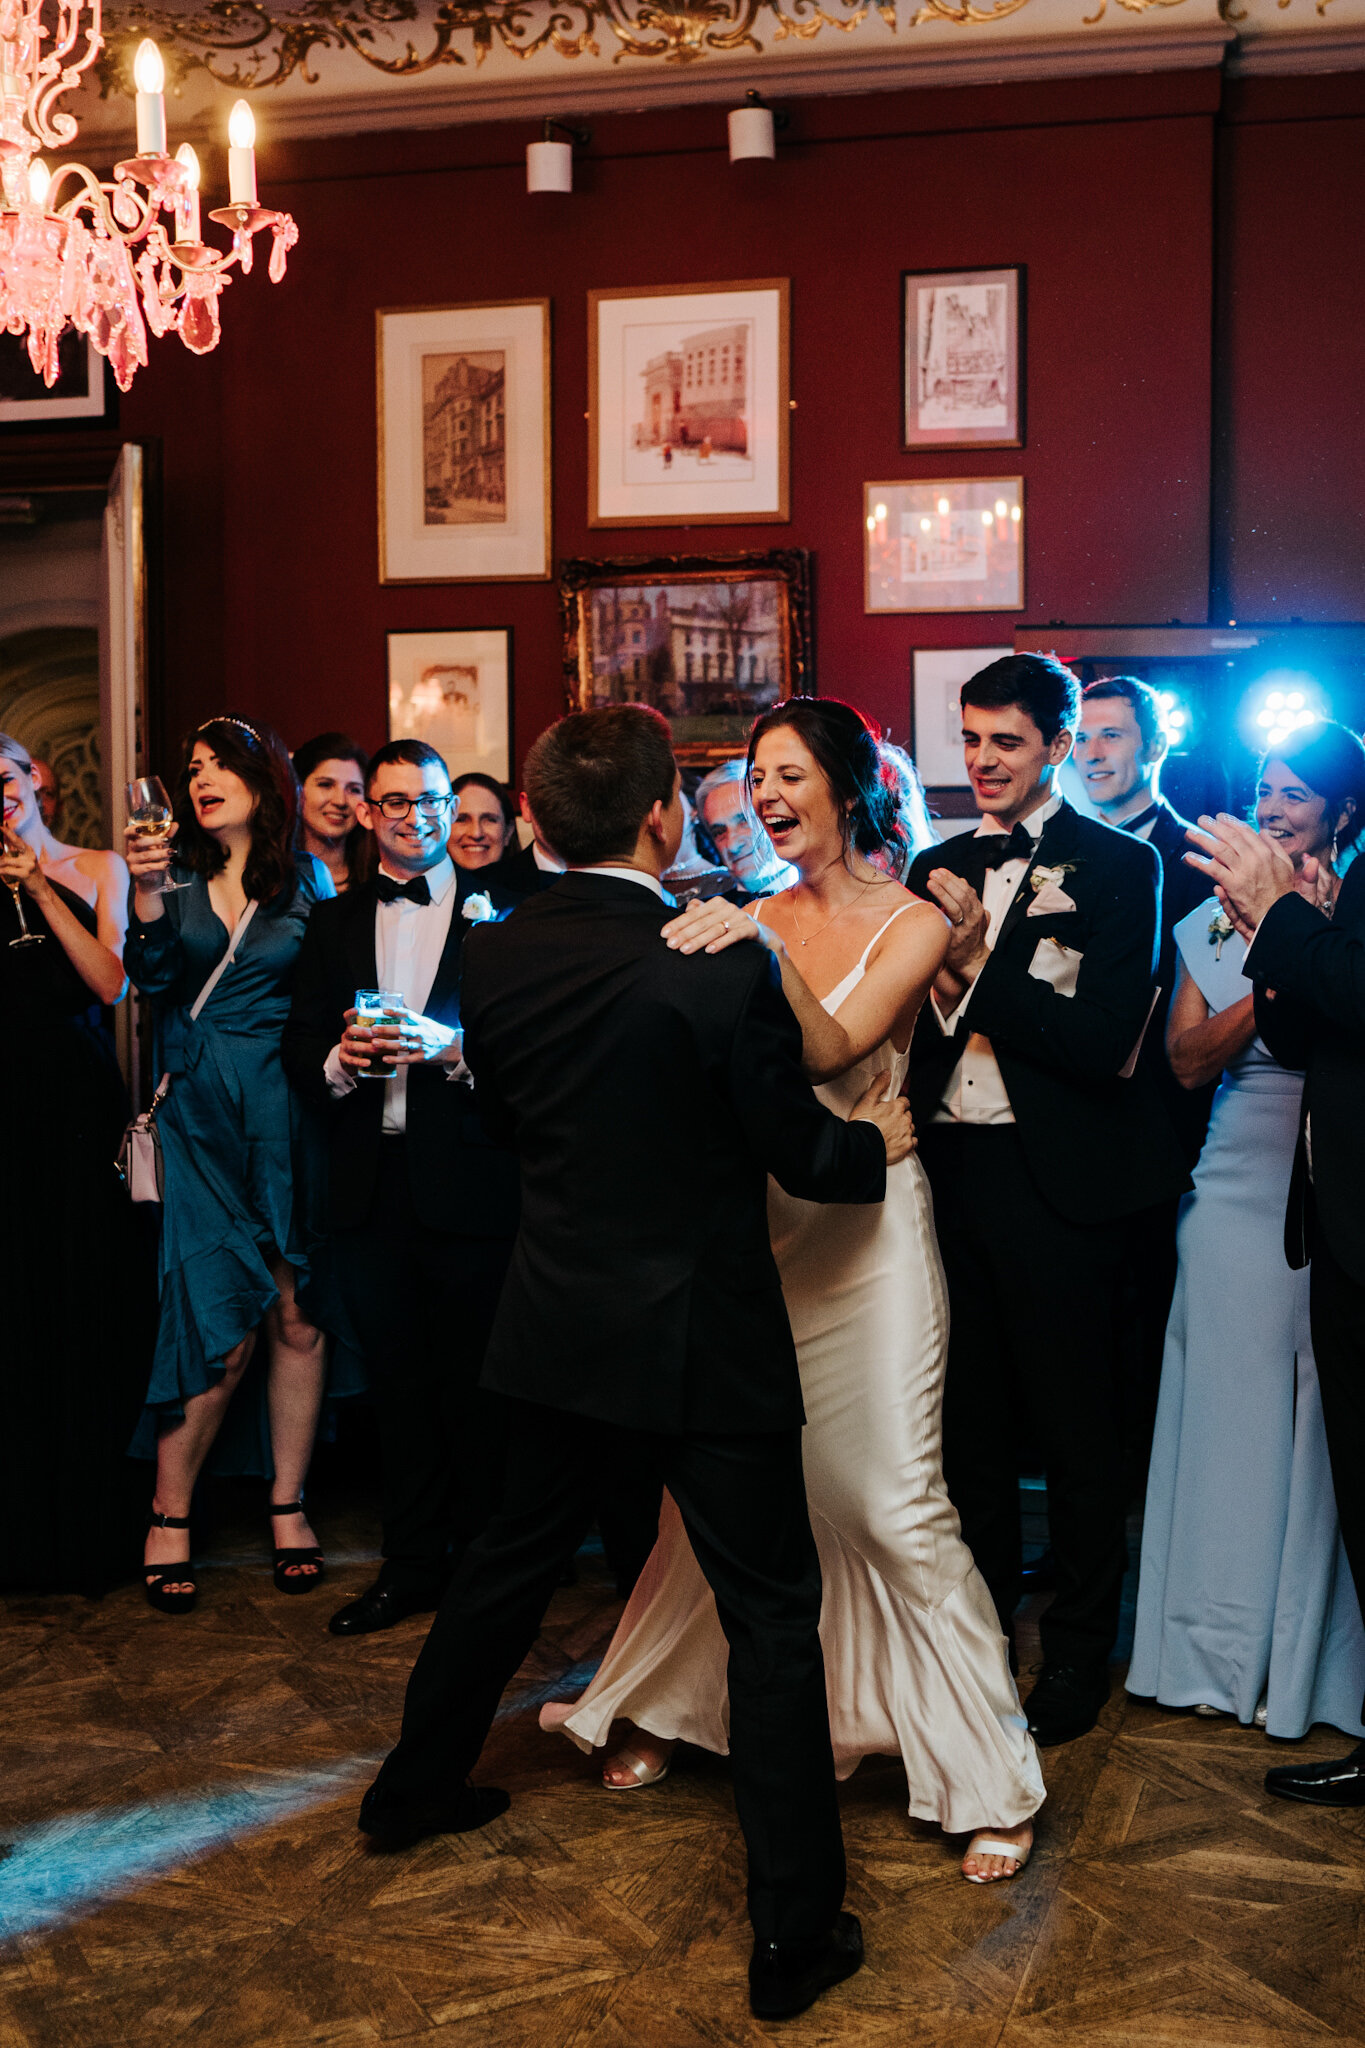 Bride and groom do their first dance as bride wears second dress of the day